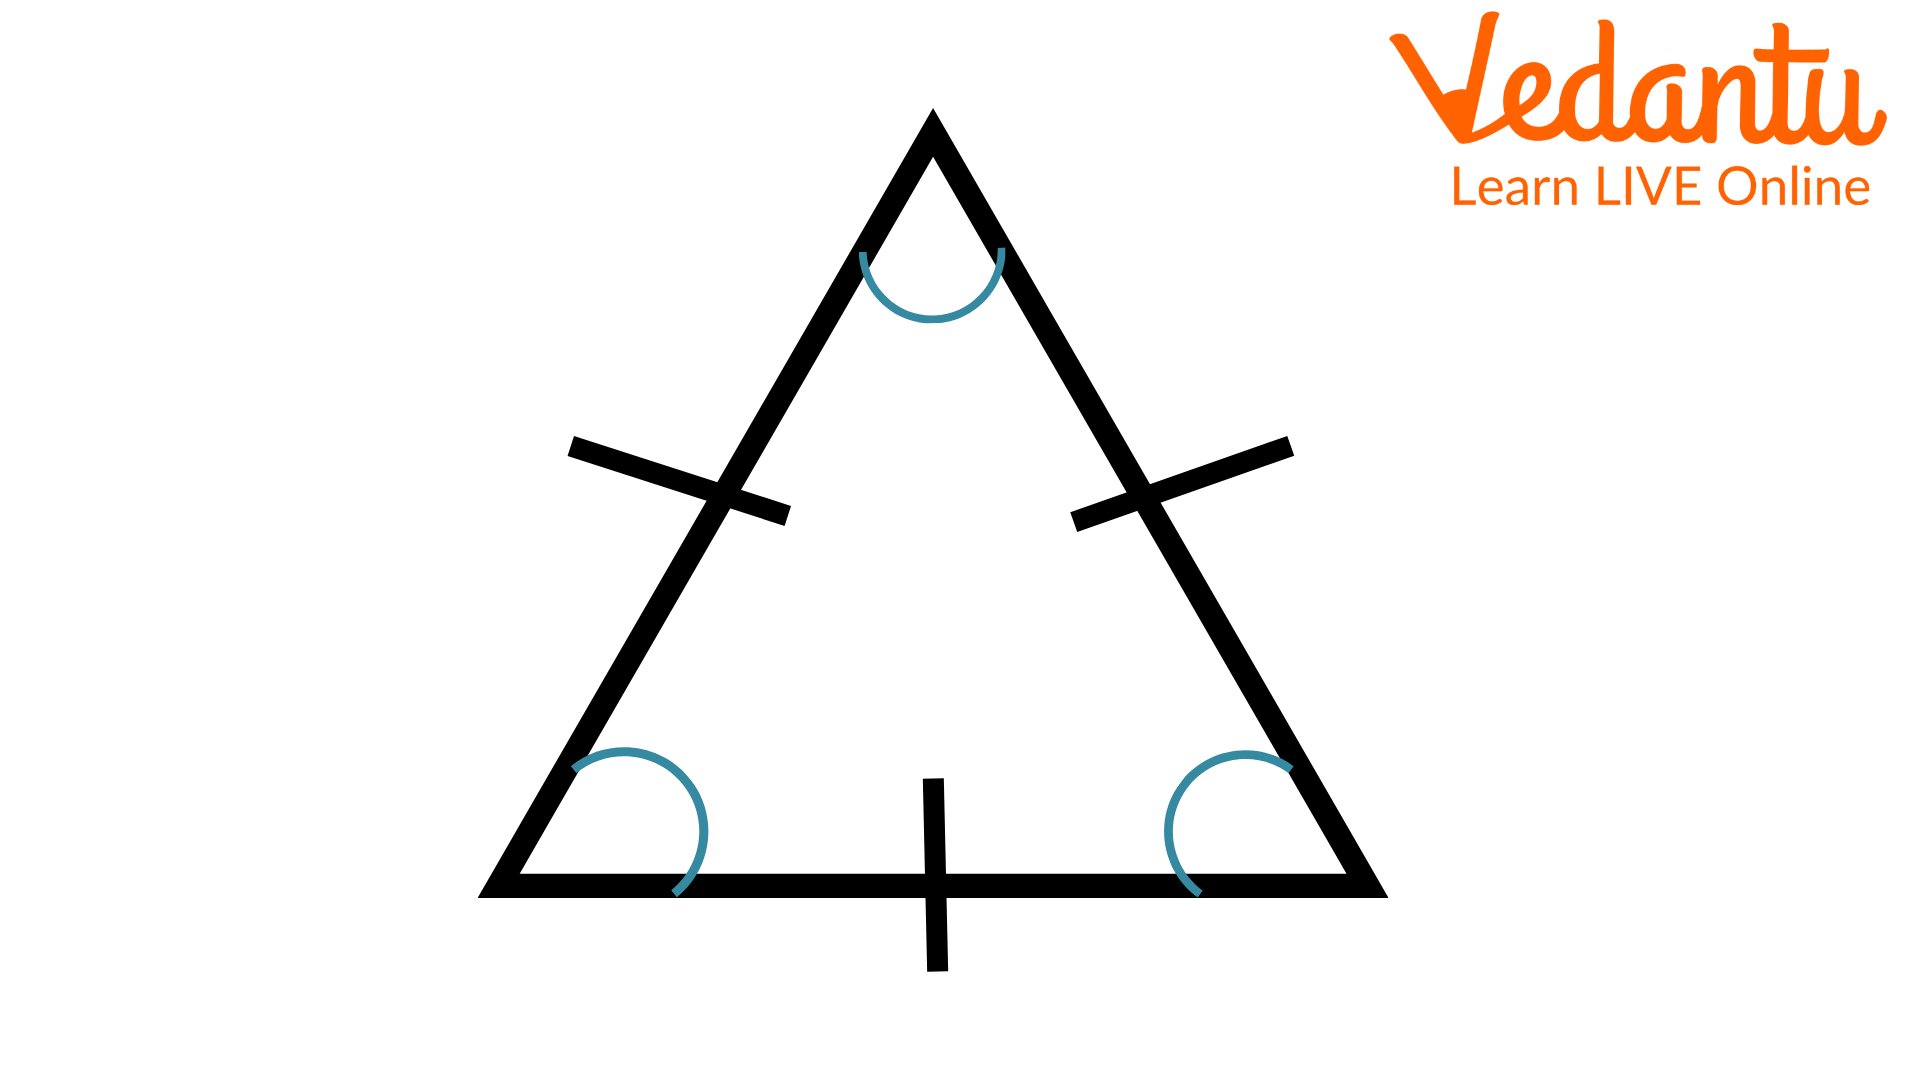 An Equilateral Triangle